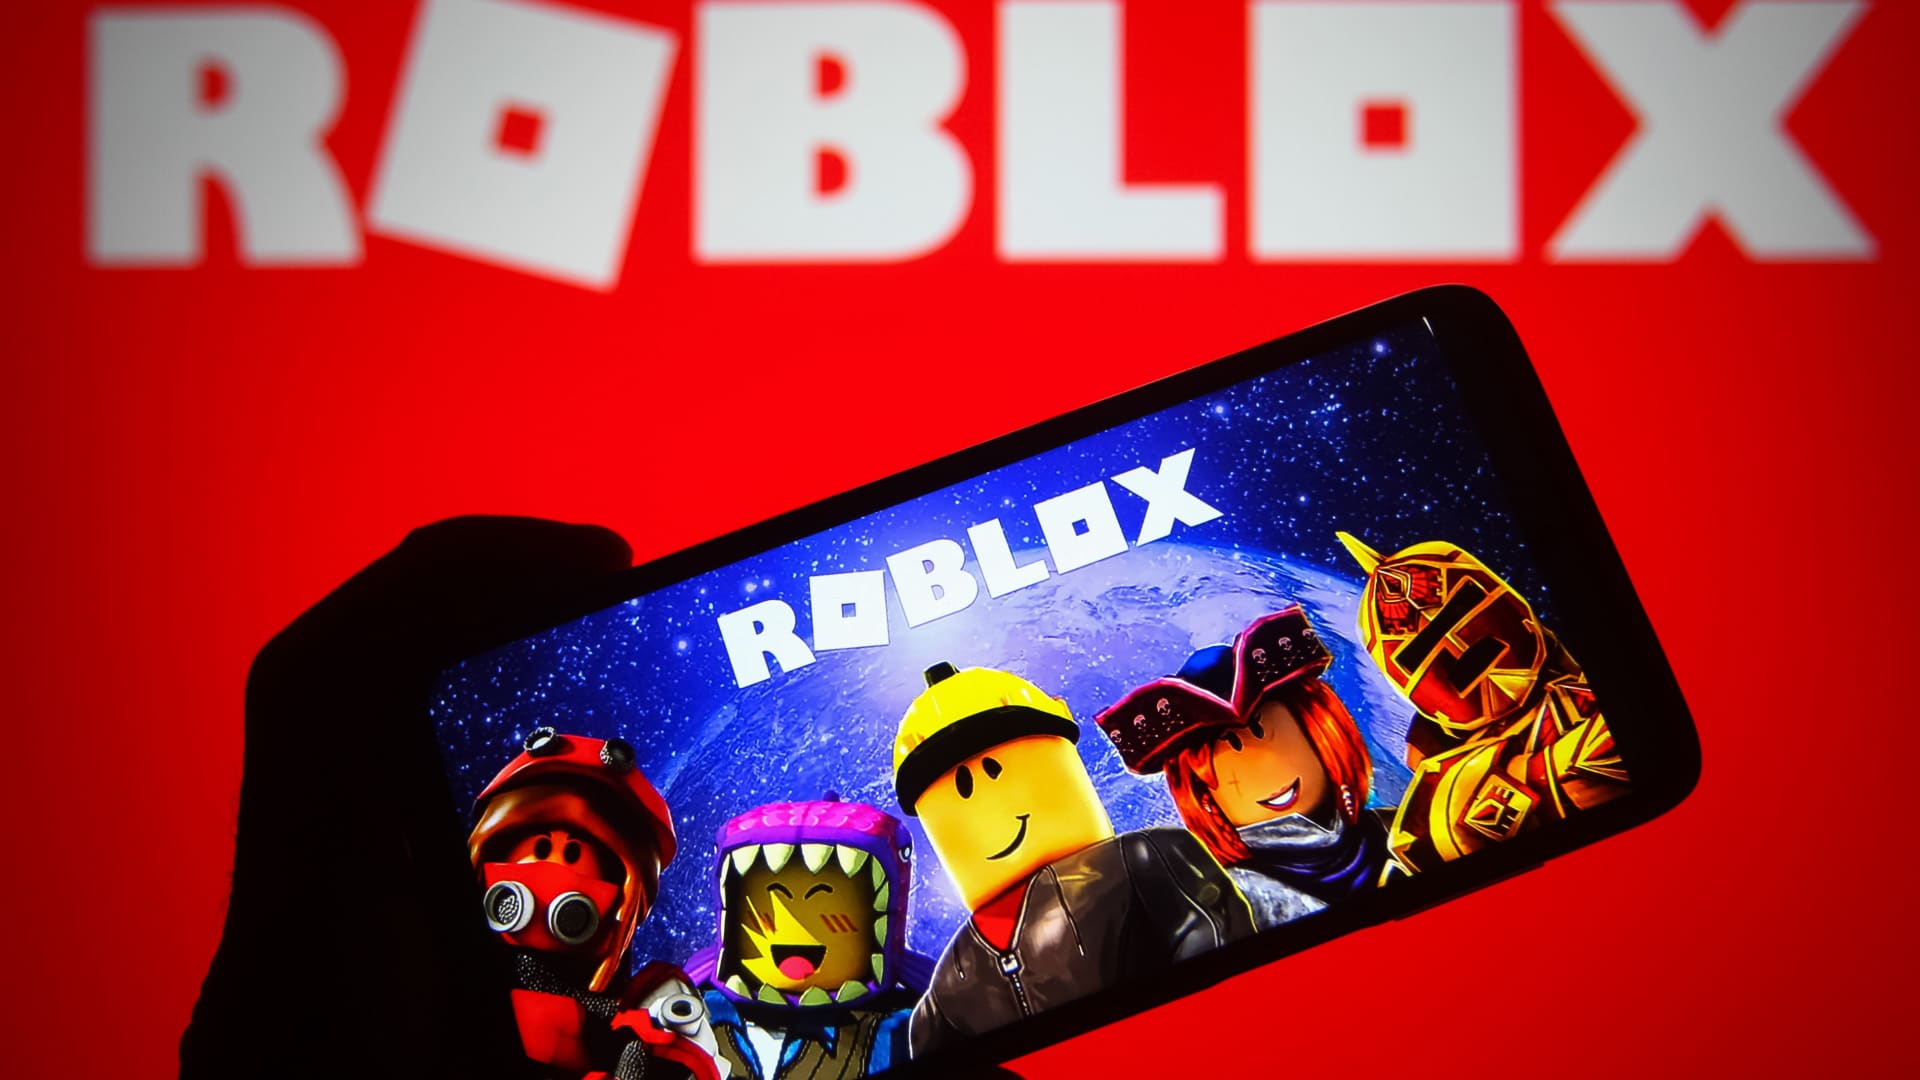 Roblox shares drop 21% after company misses estimates on top and bottom line 